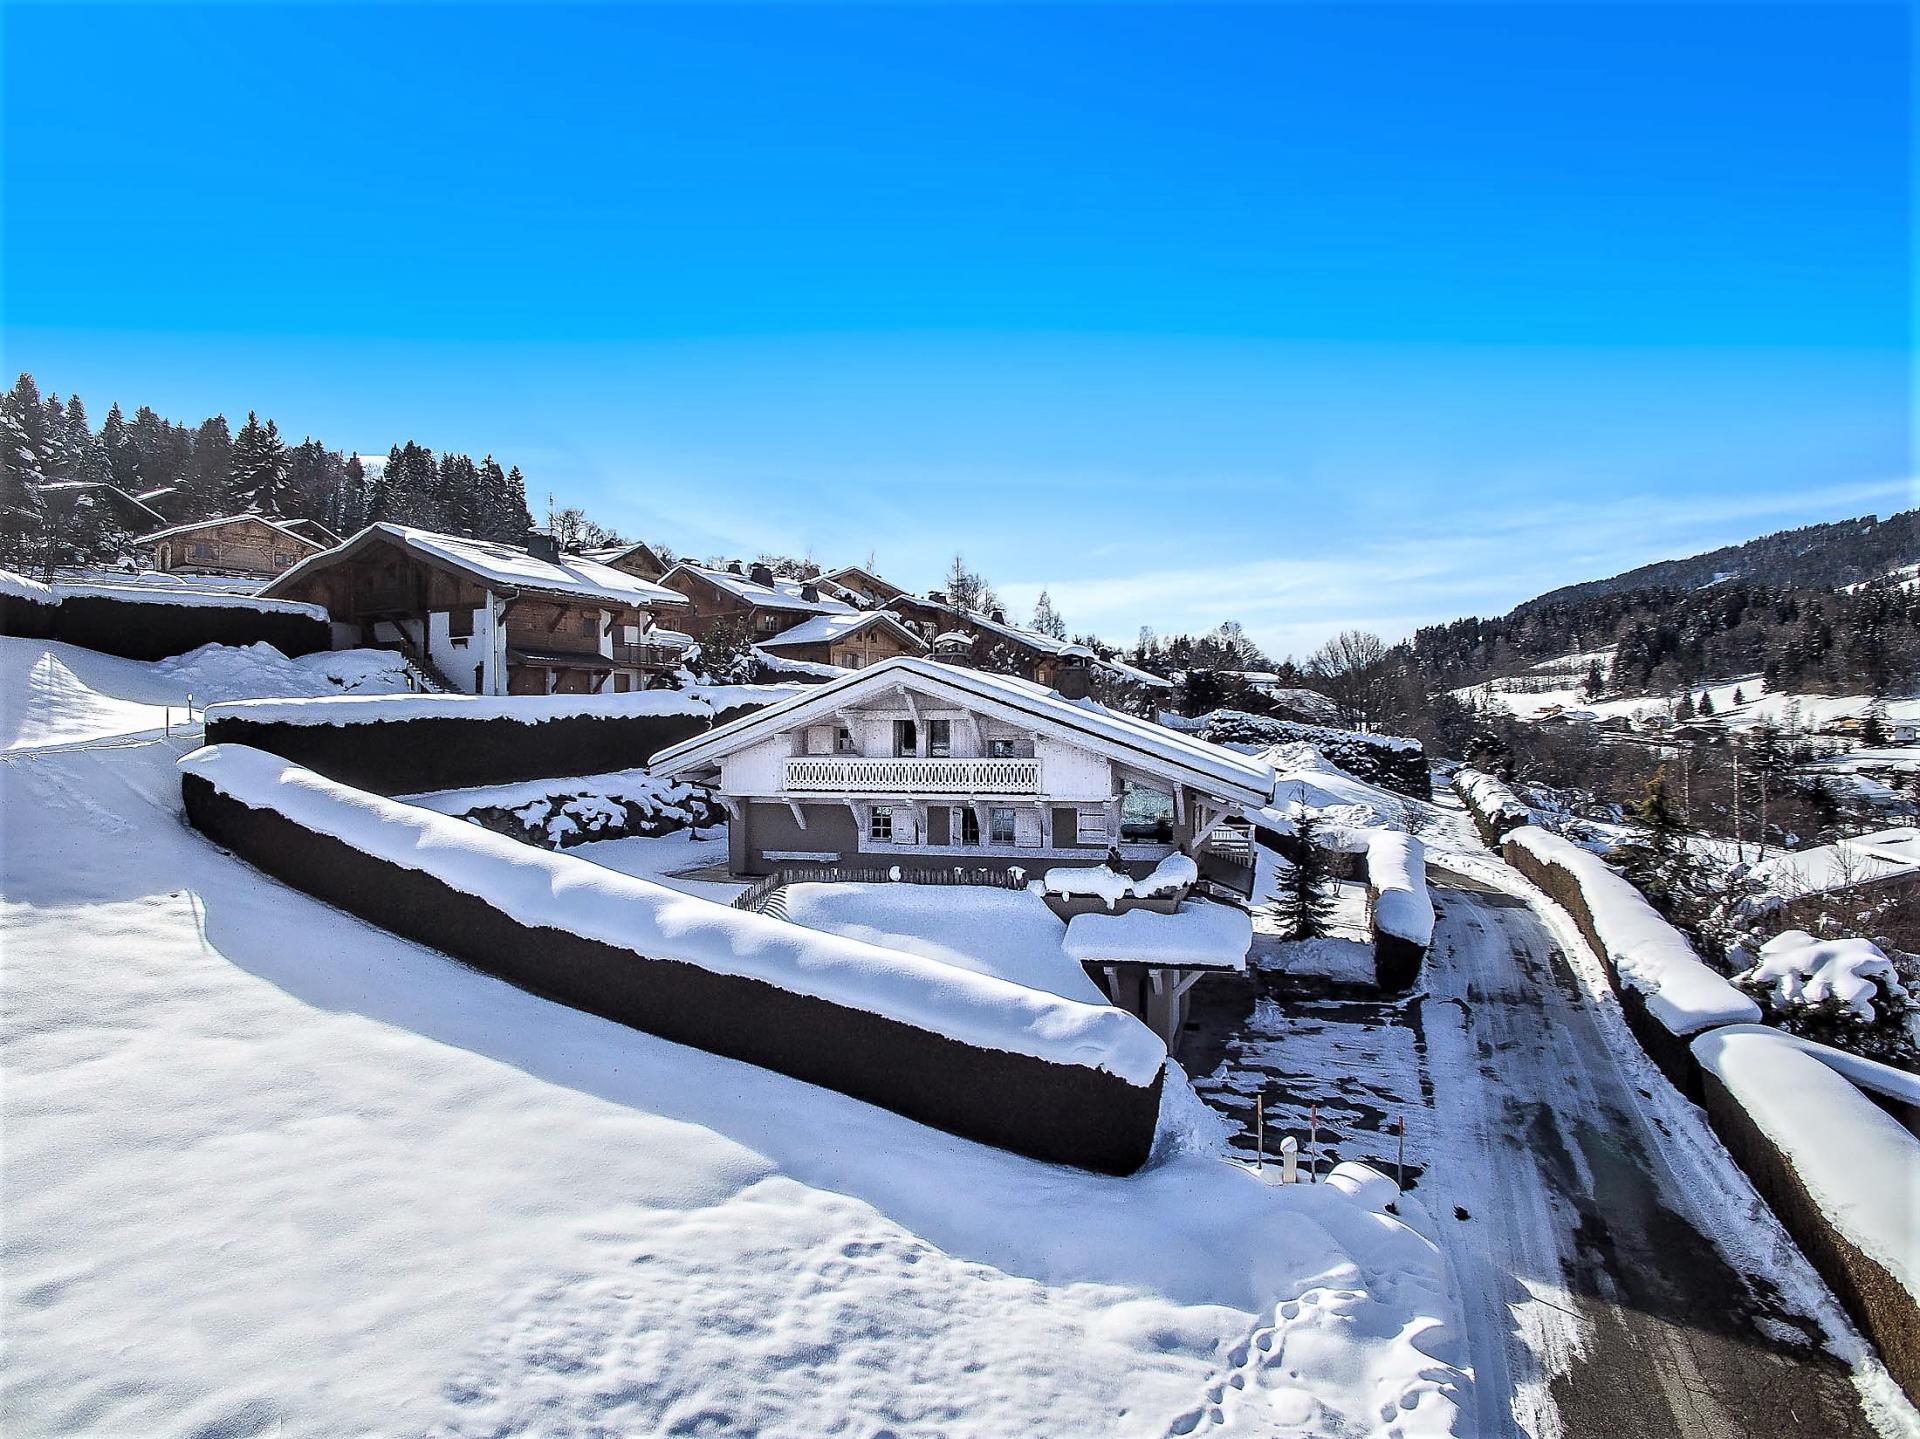 A NICE SKI HOLIDAY CHALET TO RENT IN MEGEVE